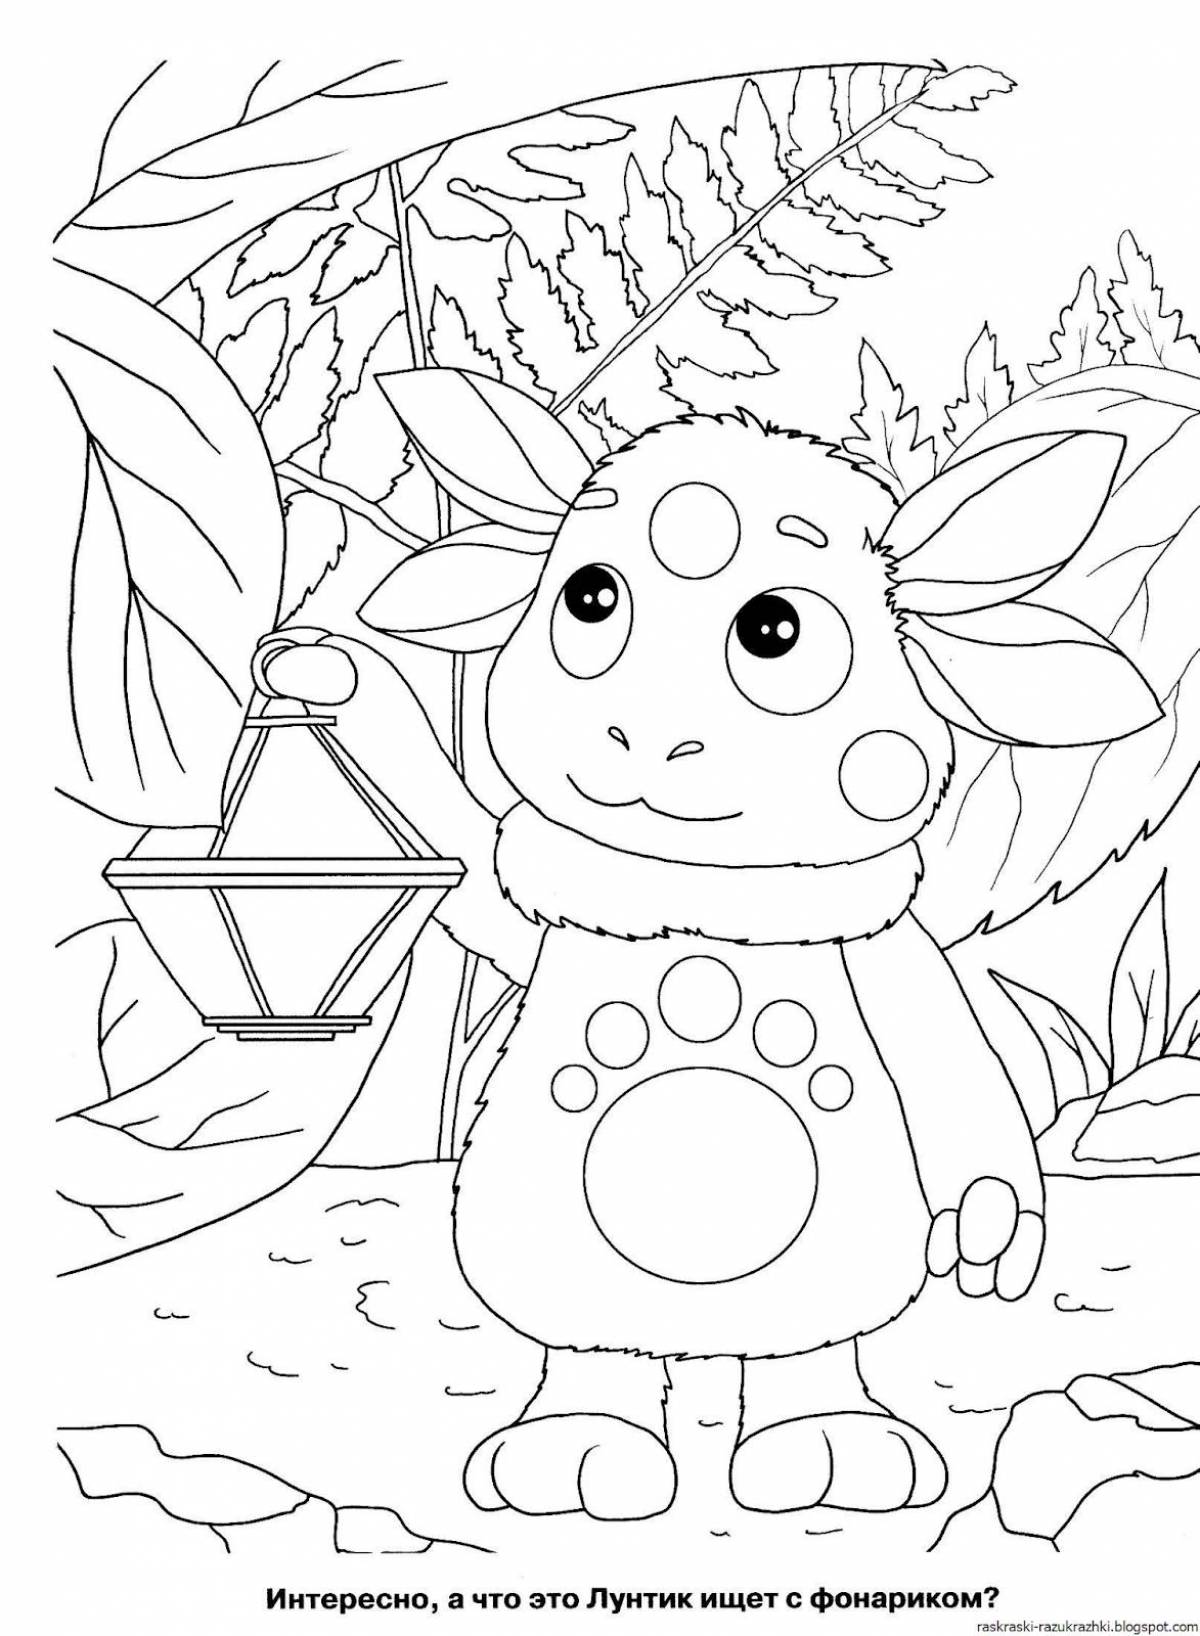 Playful children's printable coloring book